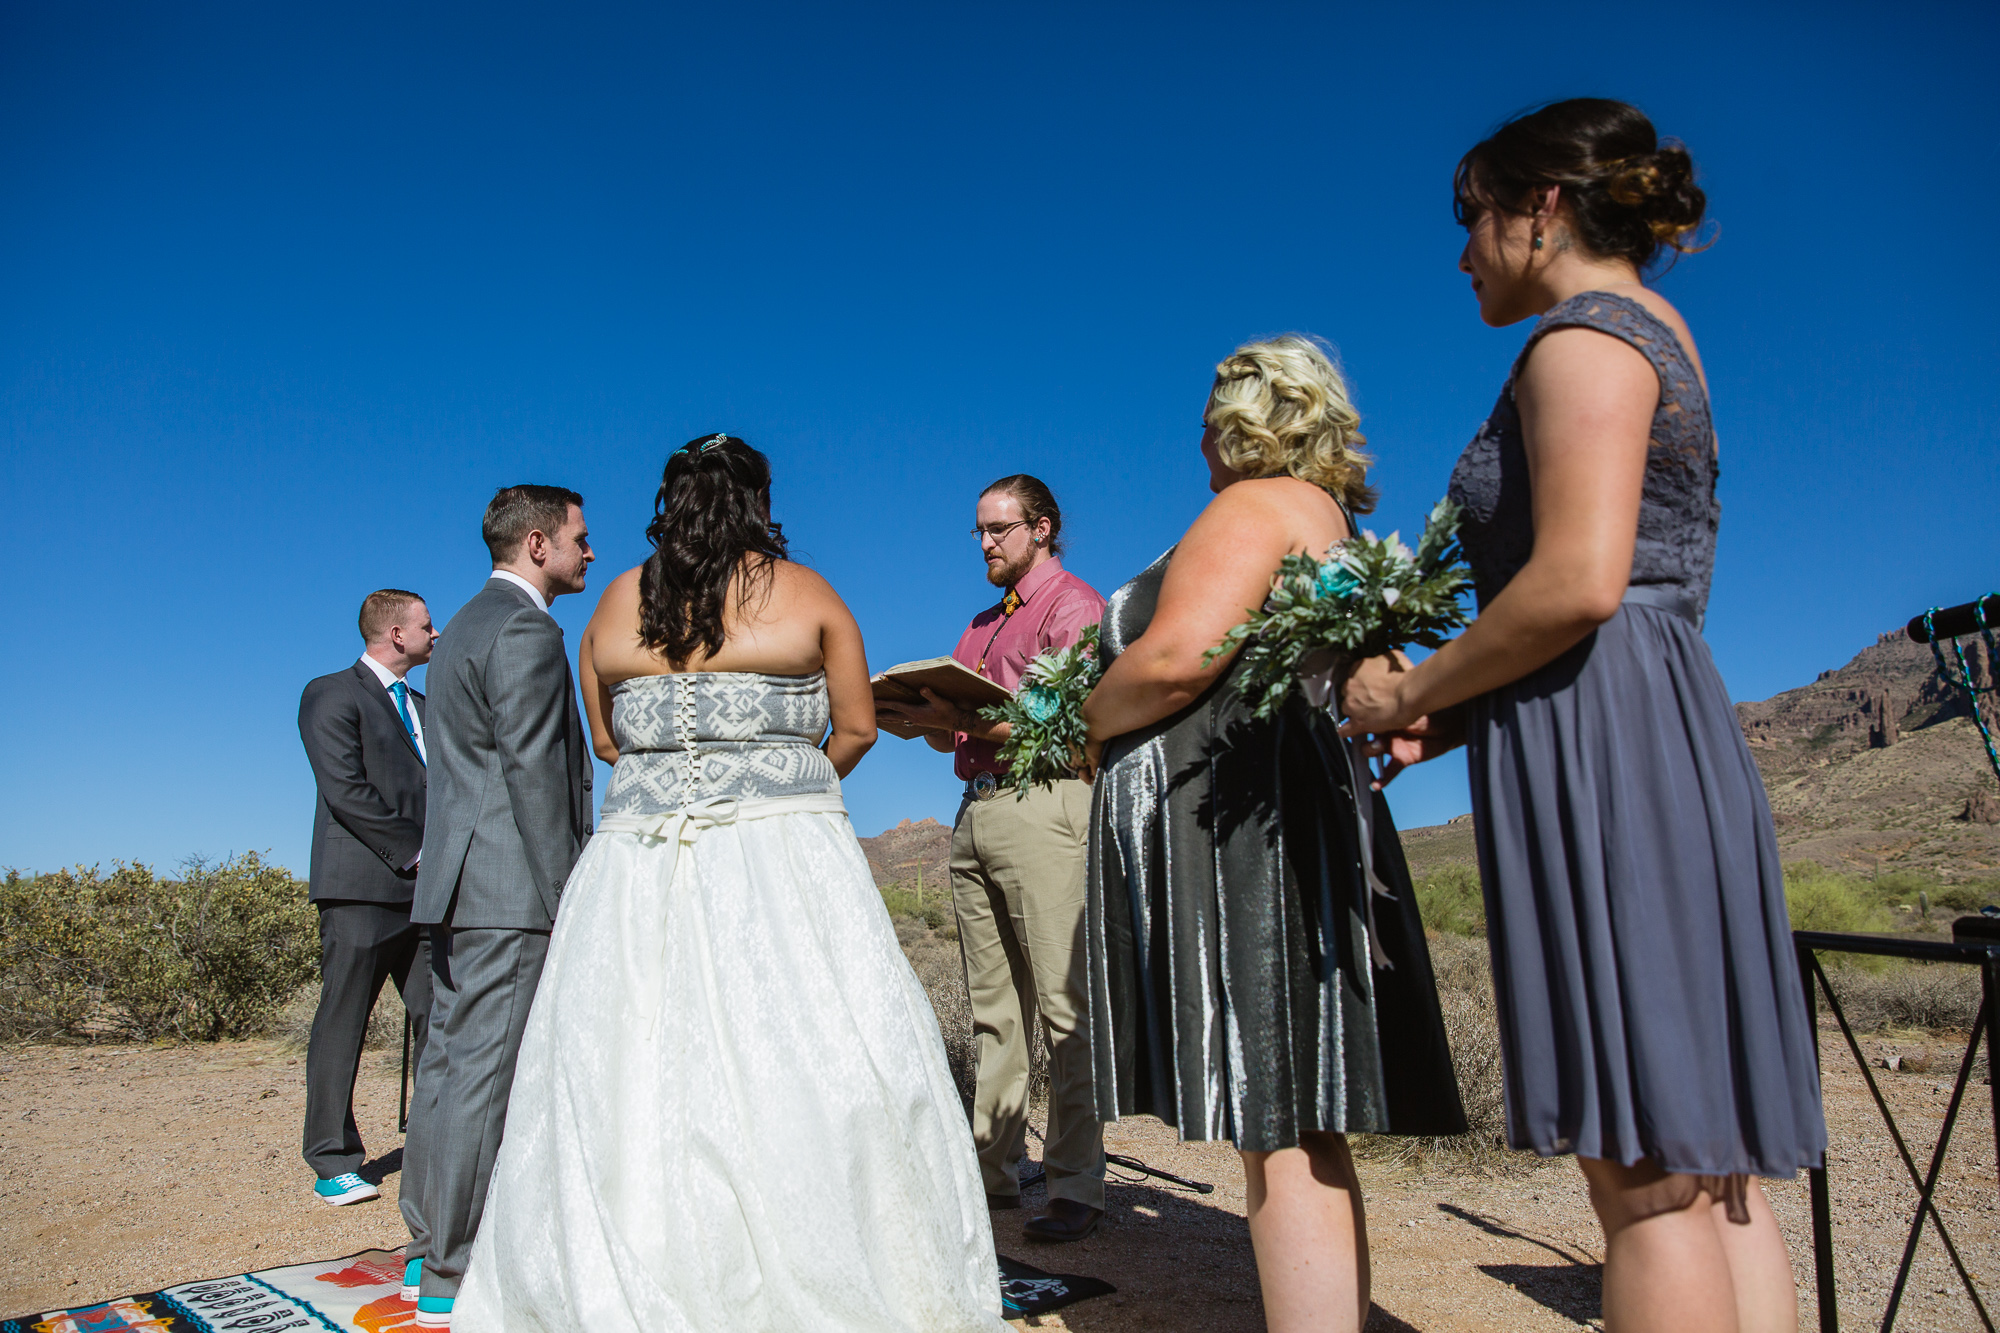 Lost Dutchman state park wedding ceremony by PMA Photography.